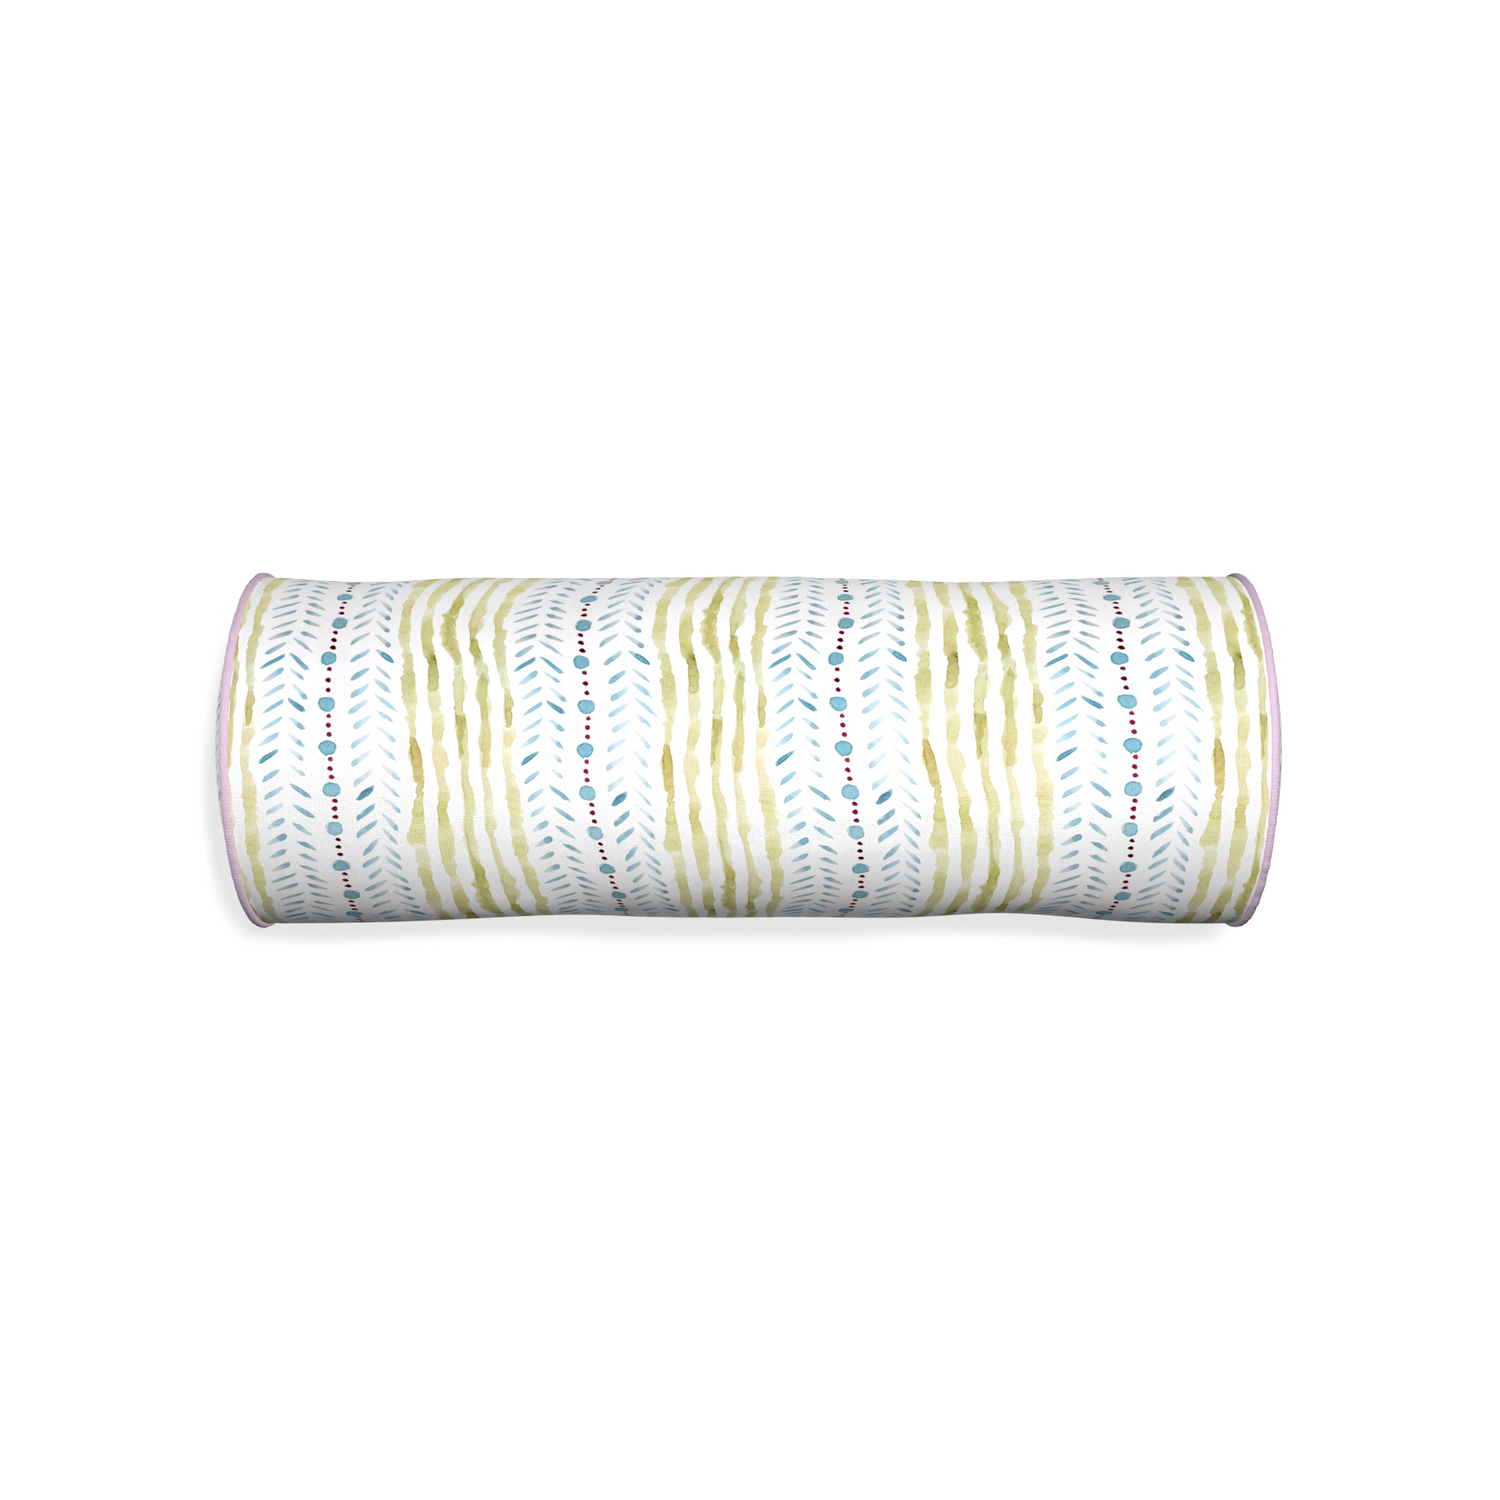 Bolster julia custom blue & green stripedpillow with l piping on white background